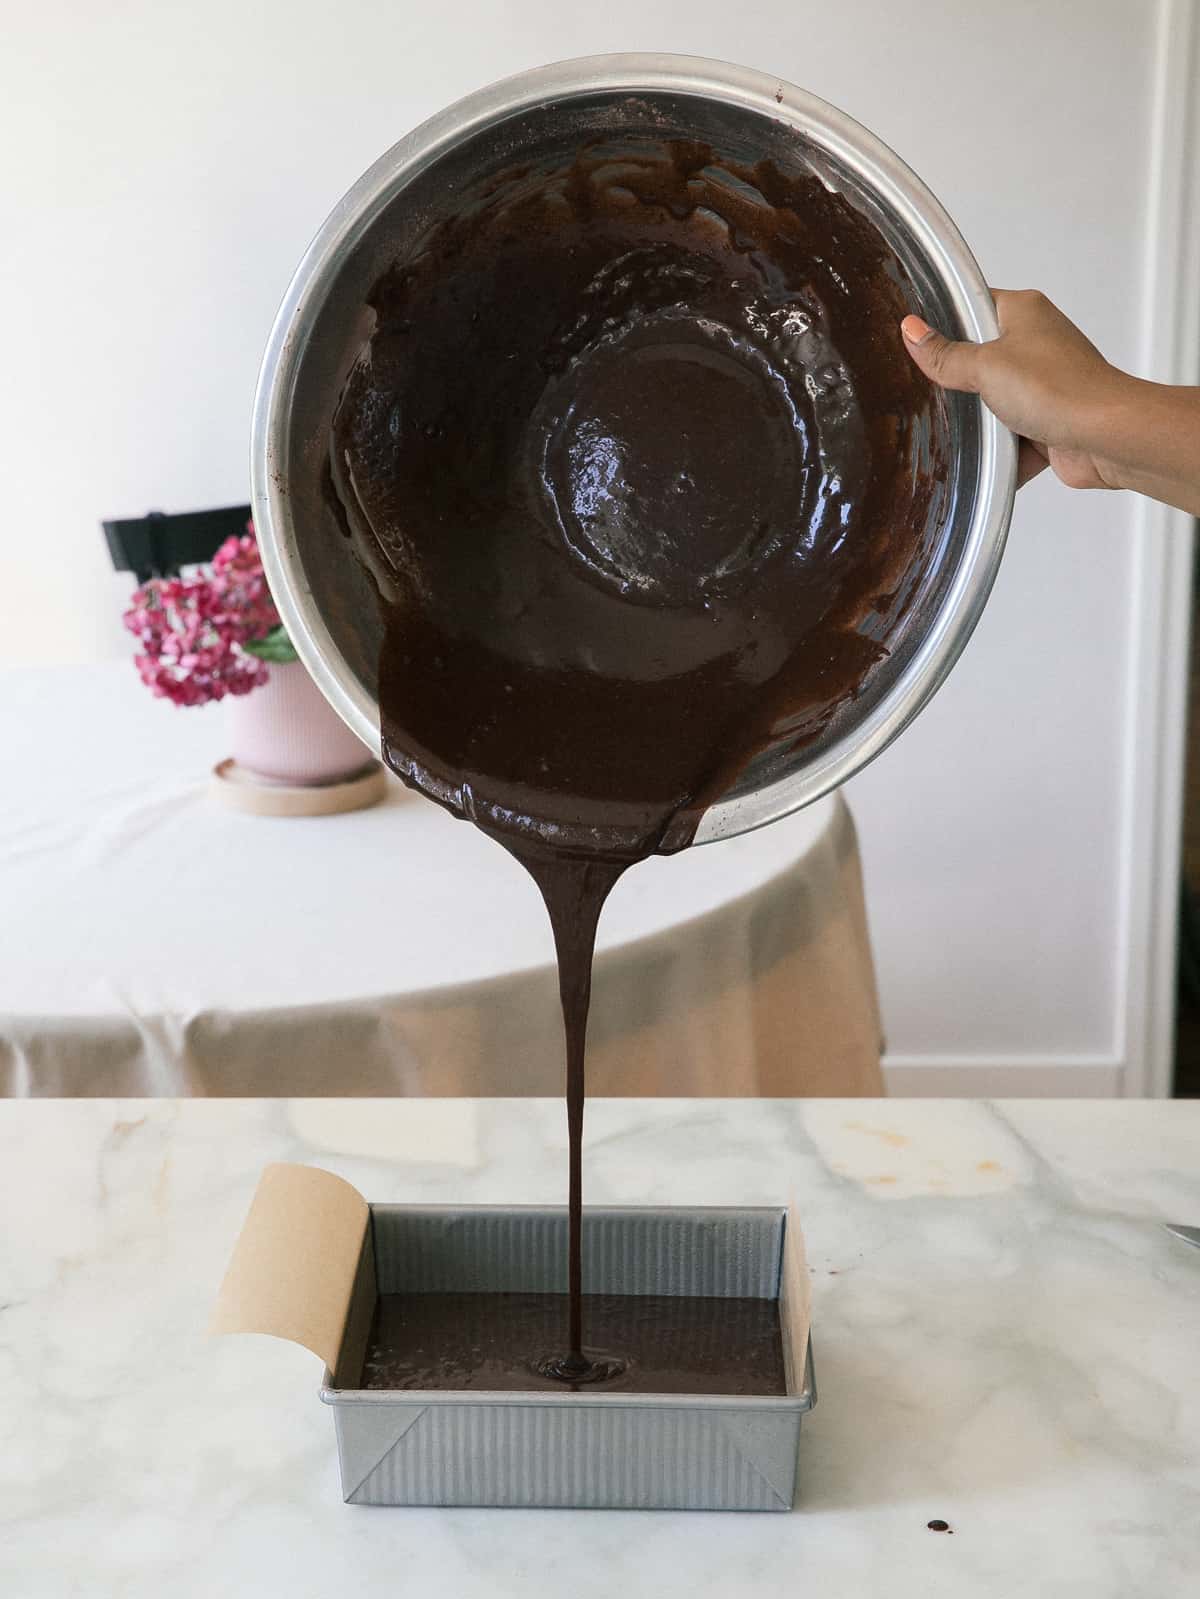 chocolate batter going into pan